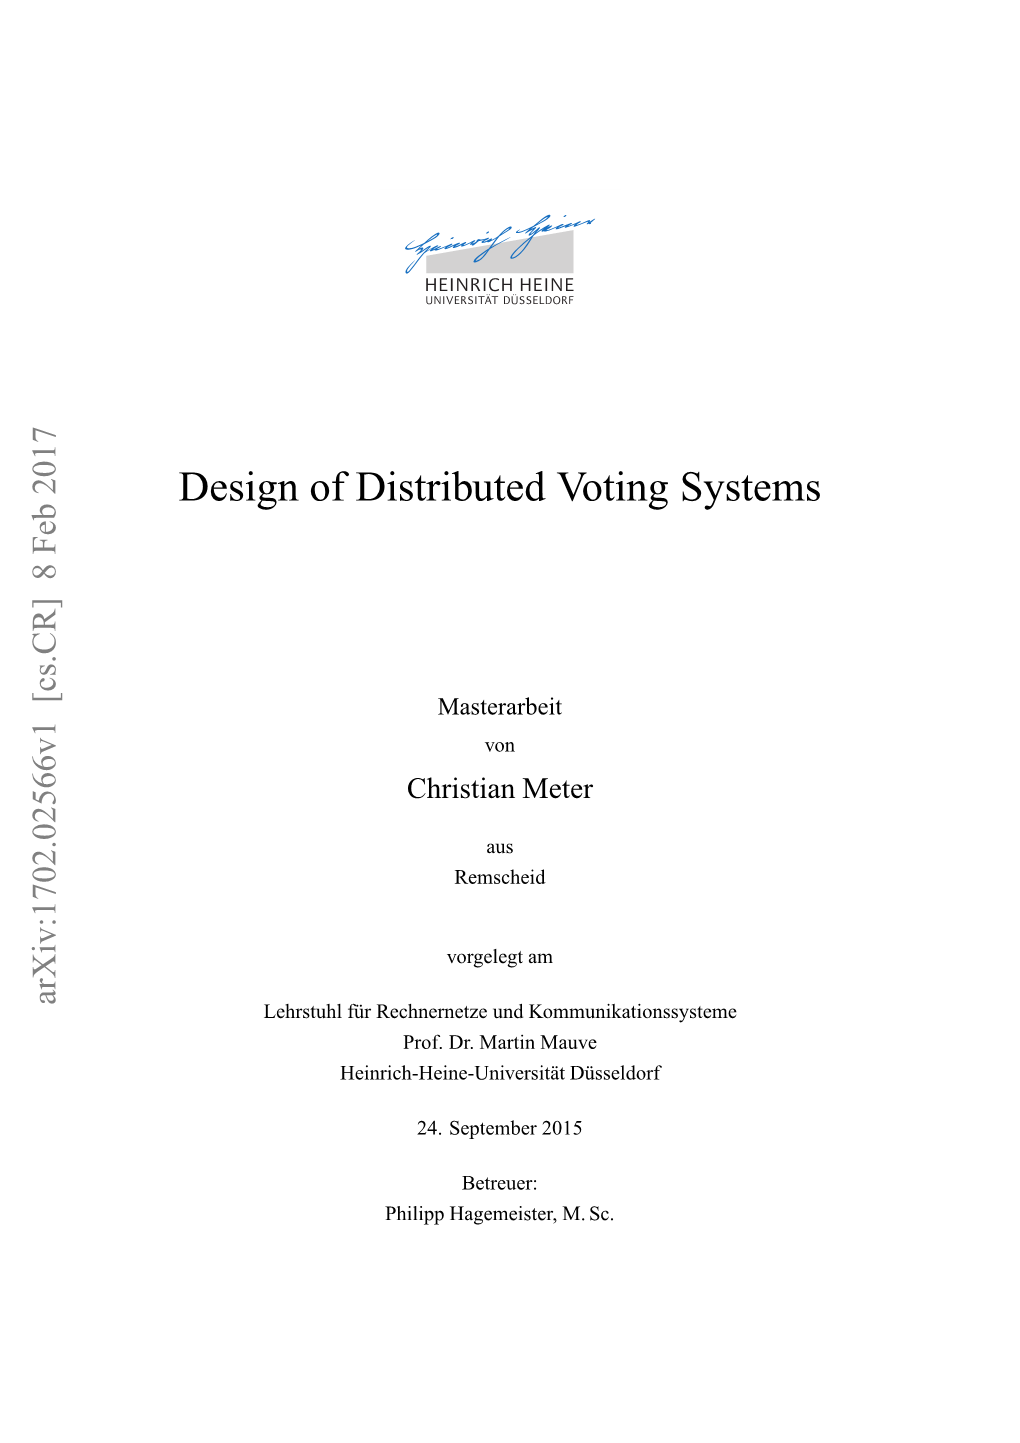 Design of Distributed Voting Systems